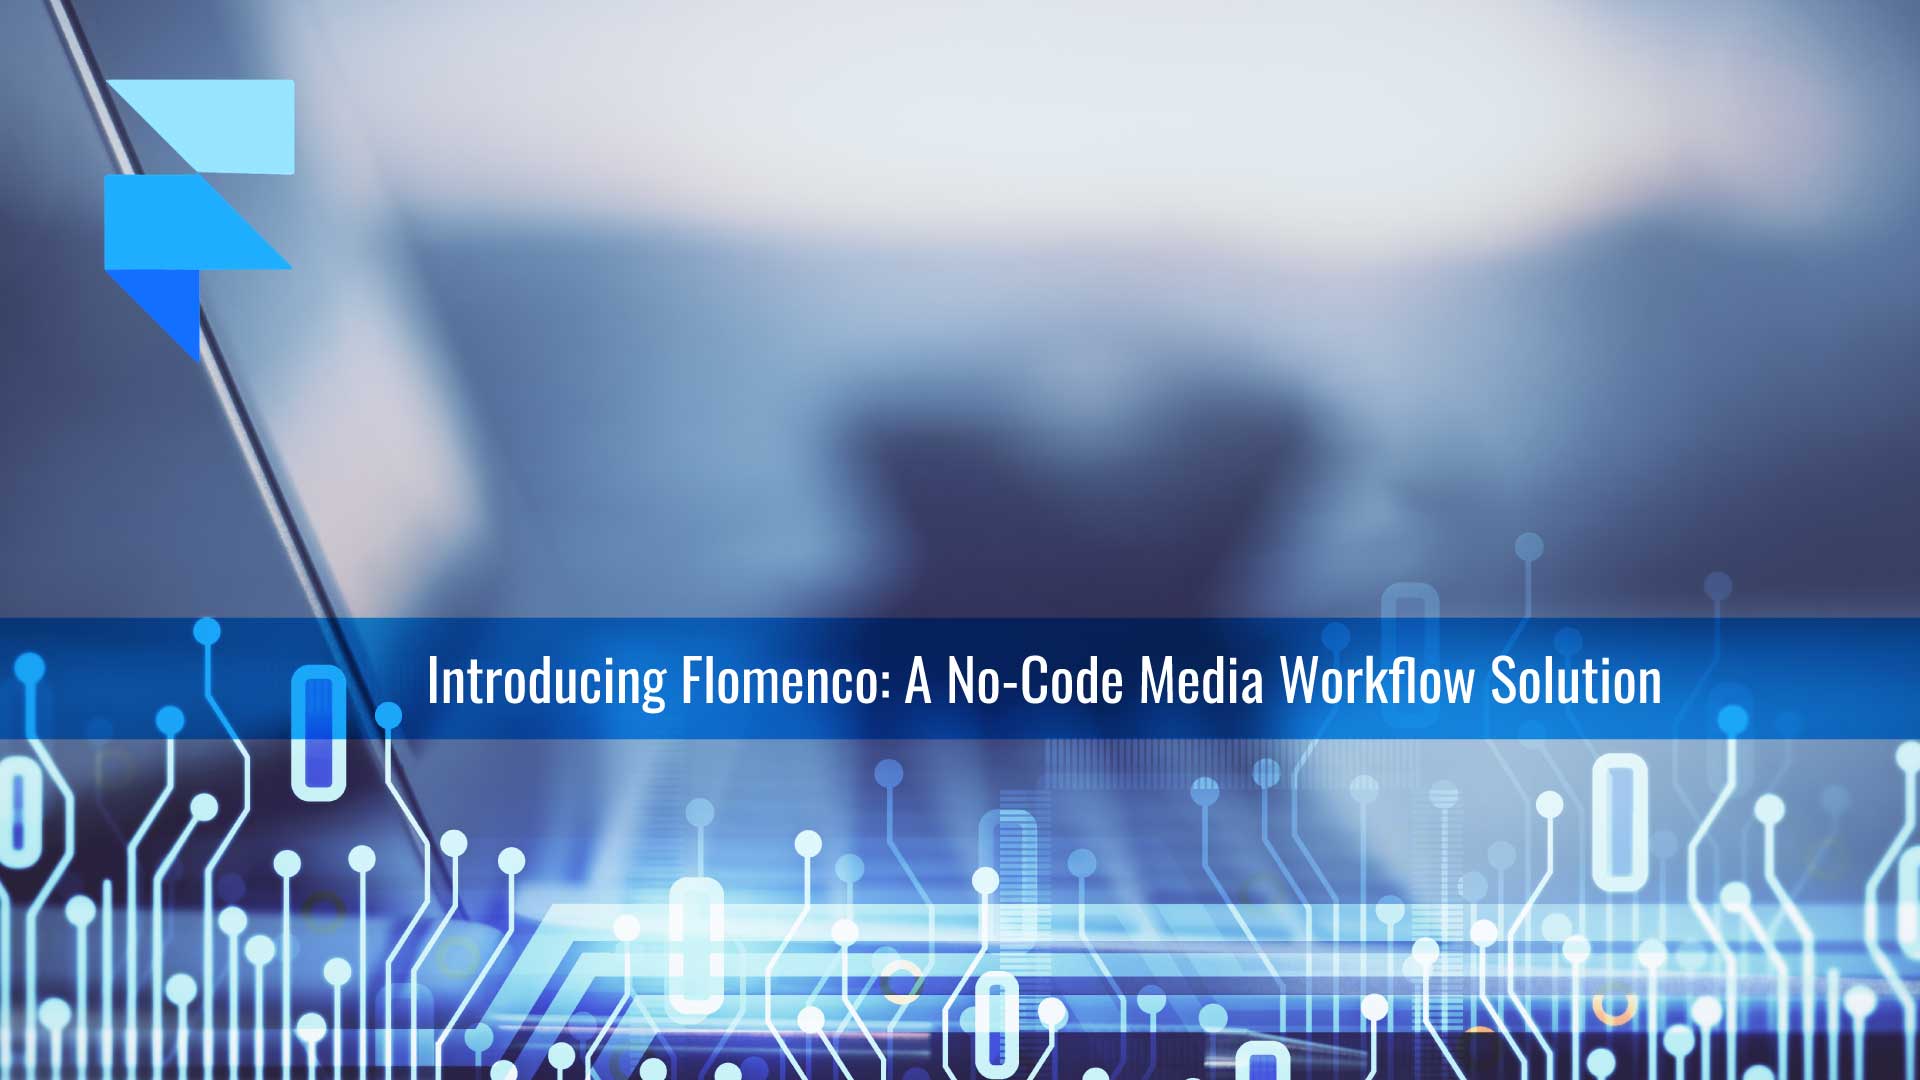 Introducing Flomenco: A No-Code Media Workflow Solution Built by Media Technologists for Media Professionals